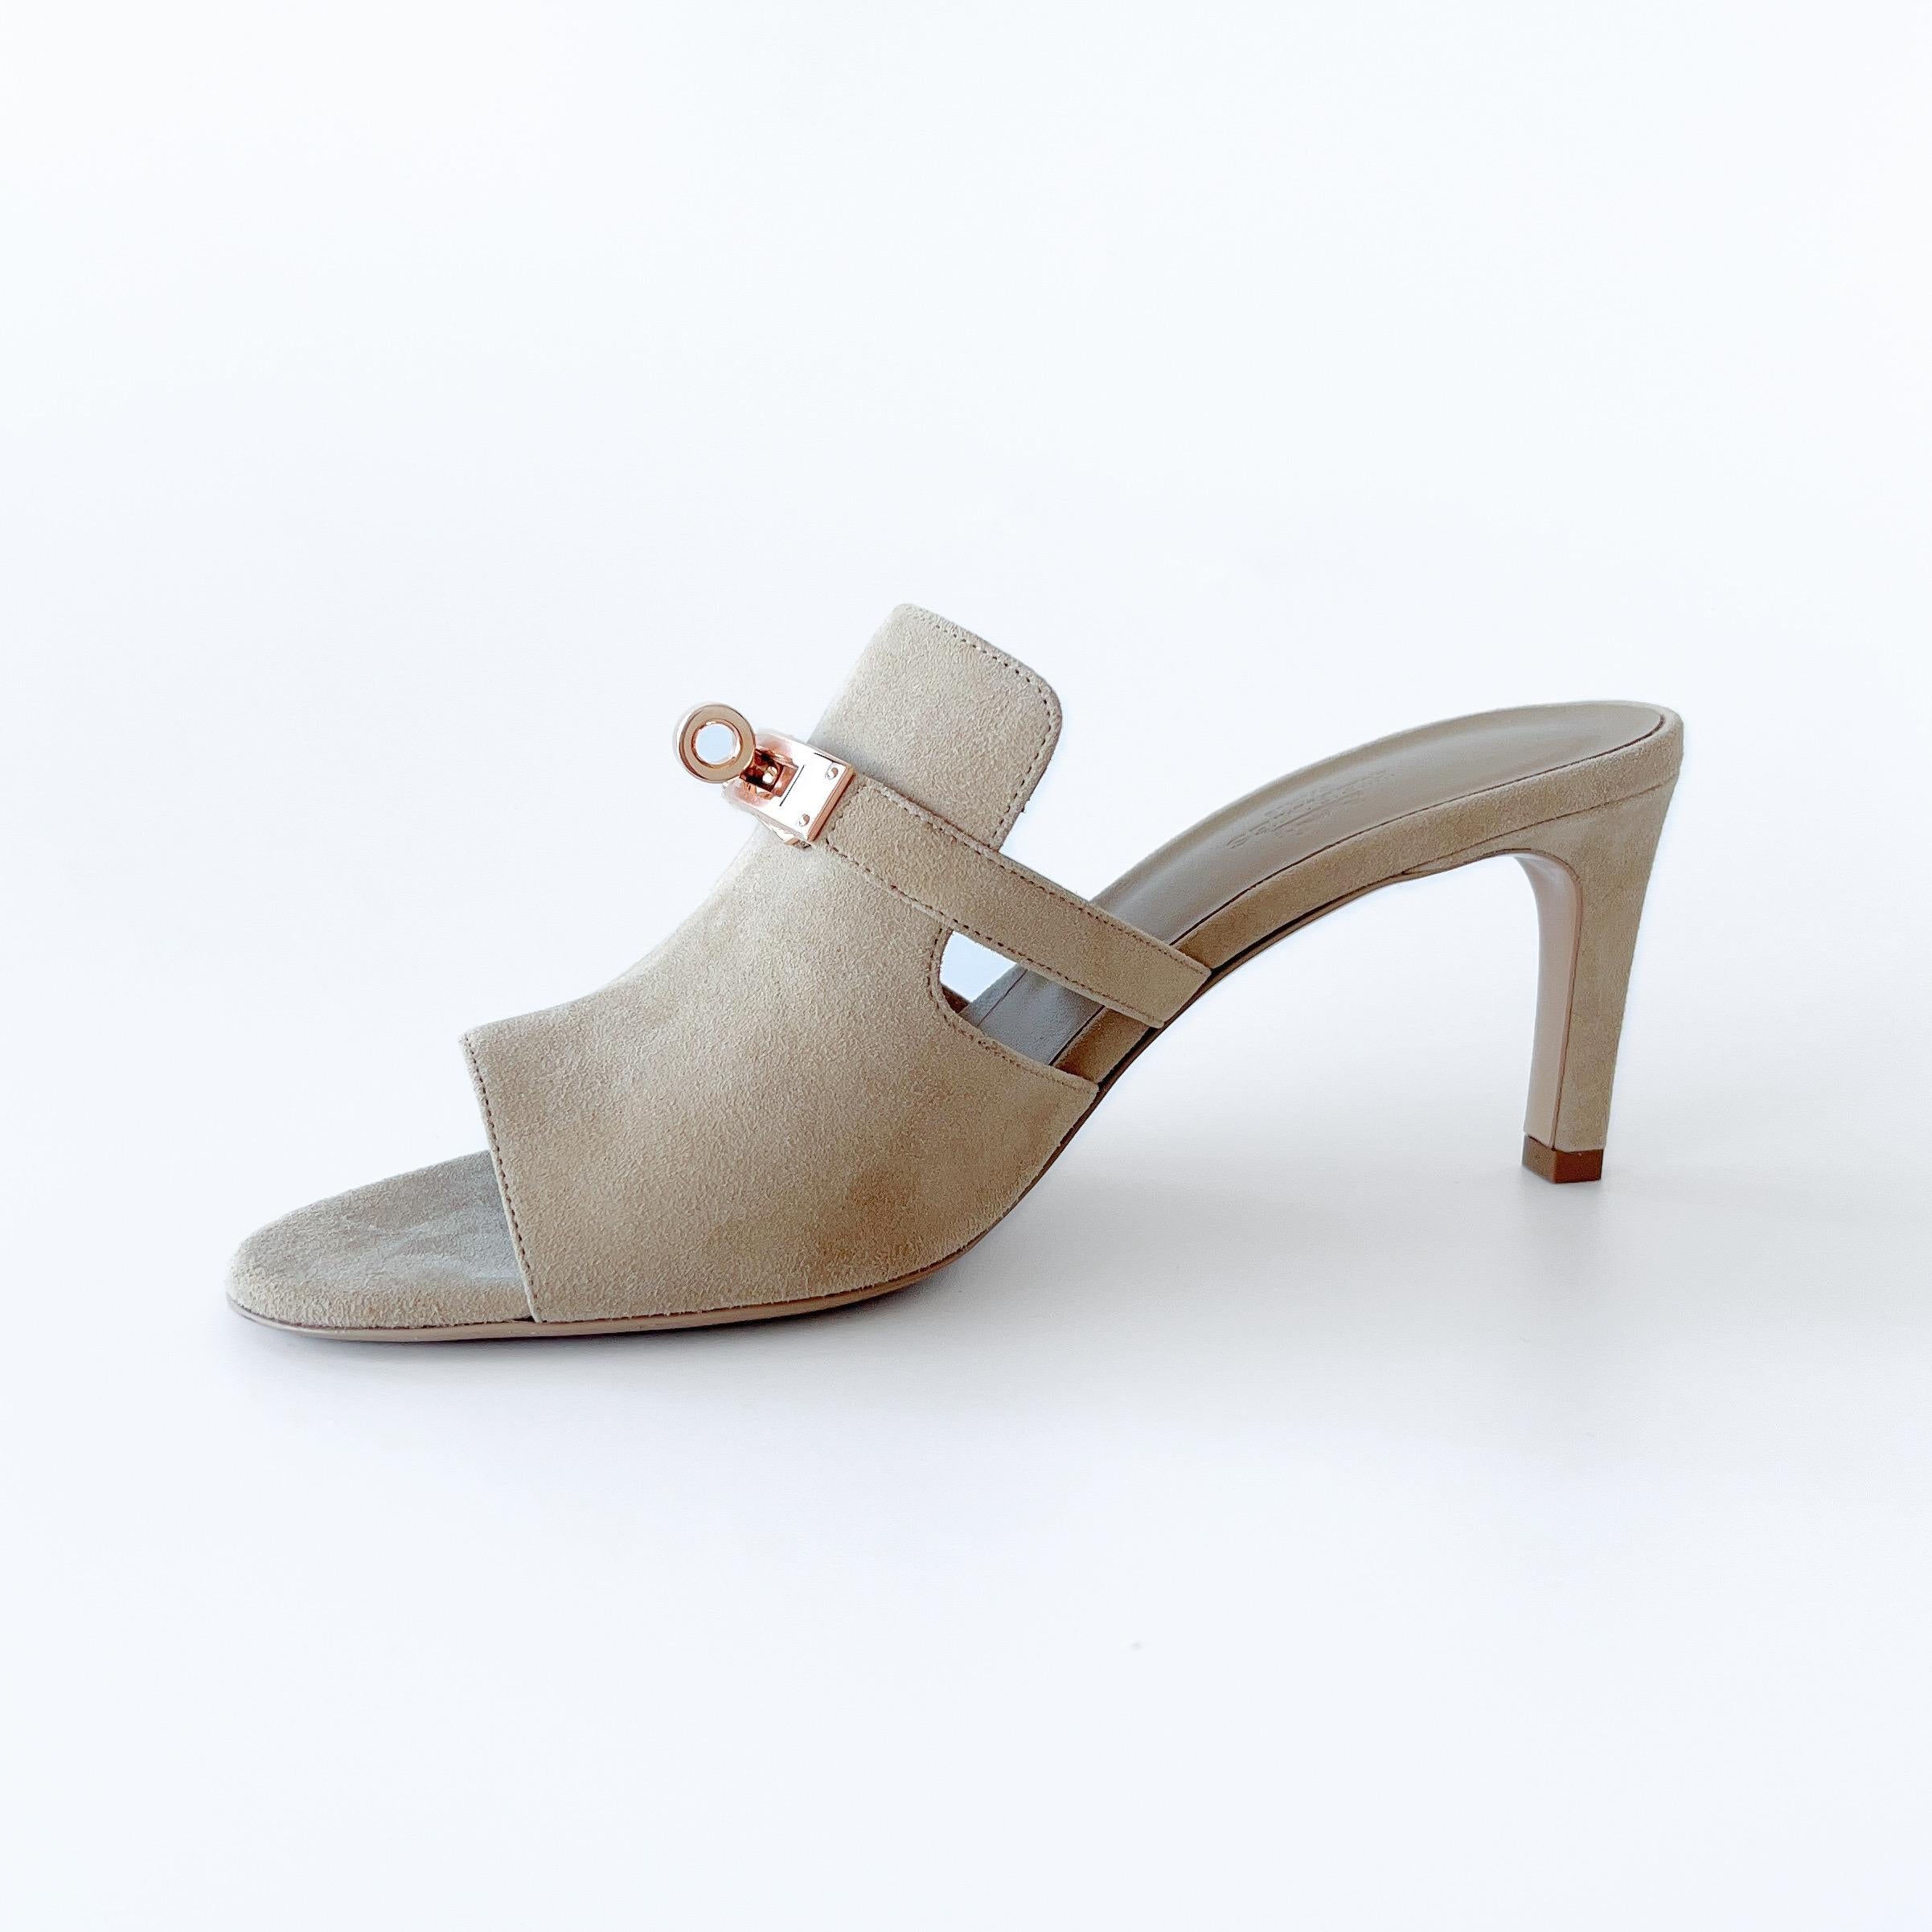 Shop these elegant Hermes Cute Sandals in Beige Argile Suede with a beige Sole. This pair of beautiful Hermes Cute Sandals come with a Rose Gold Plated buckle in the classic Kelly style. They are made to be true fitting to size. These are perfect